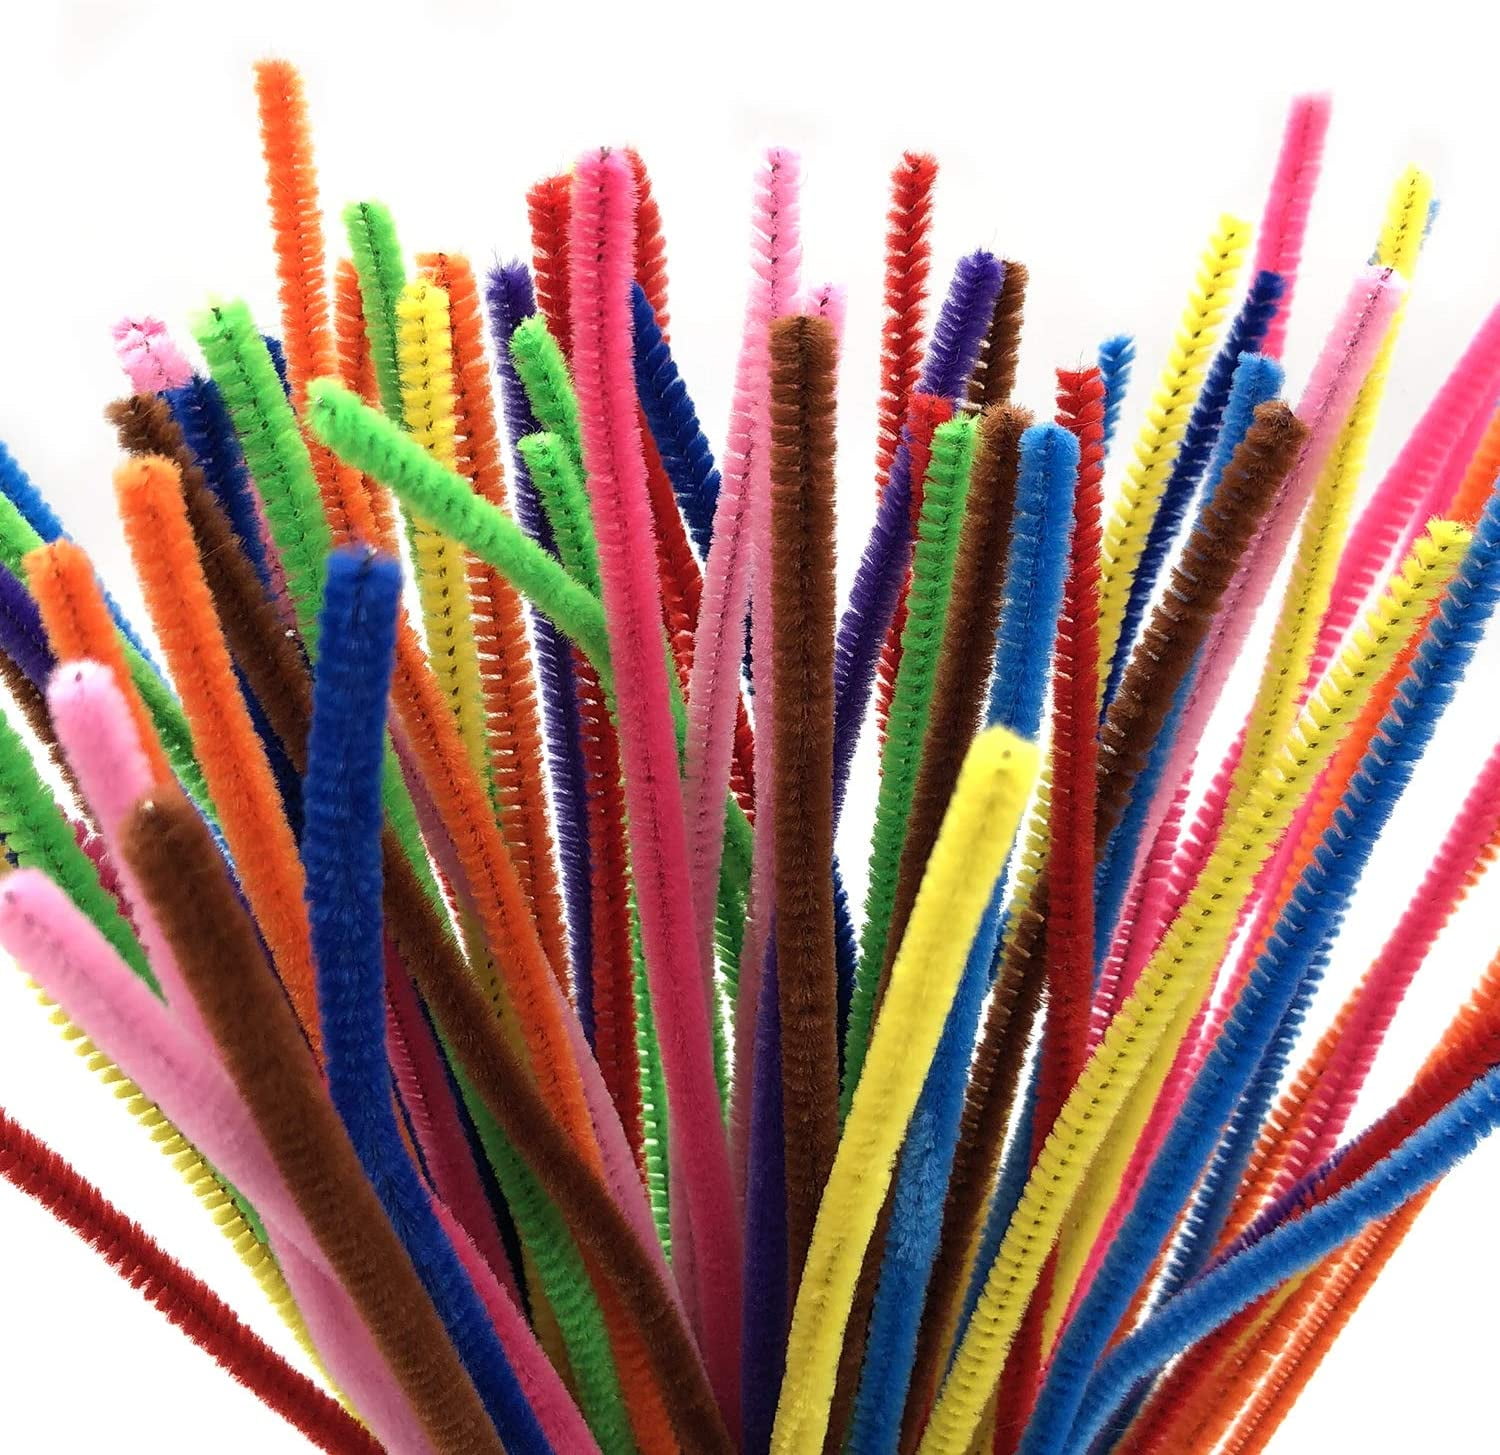 Pistha 400Pcs Craft Pipe Cleaners Chenille Stem 6mm x 12 inch Reusable Craft Bendable Twistable Children Puzzle Kindergarten Handmade DIY Art Supplies Home Decor Assorted Colors Assorted Colors 